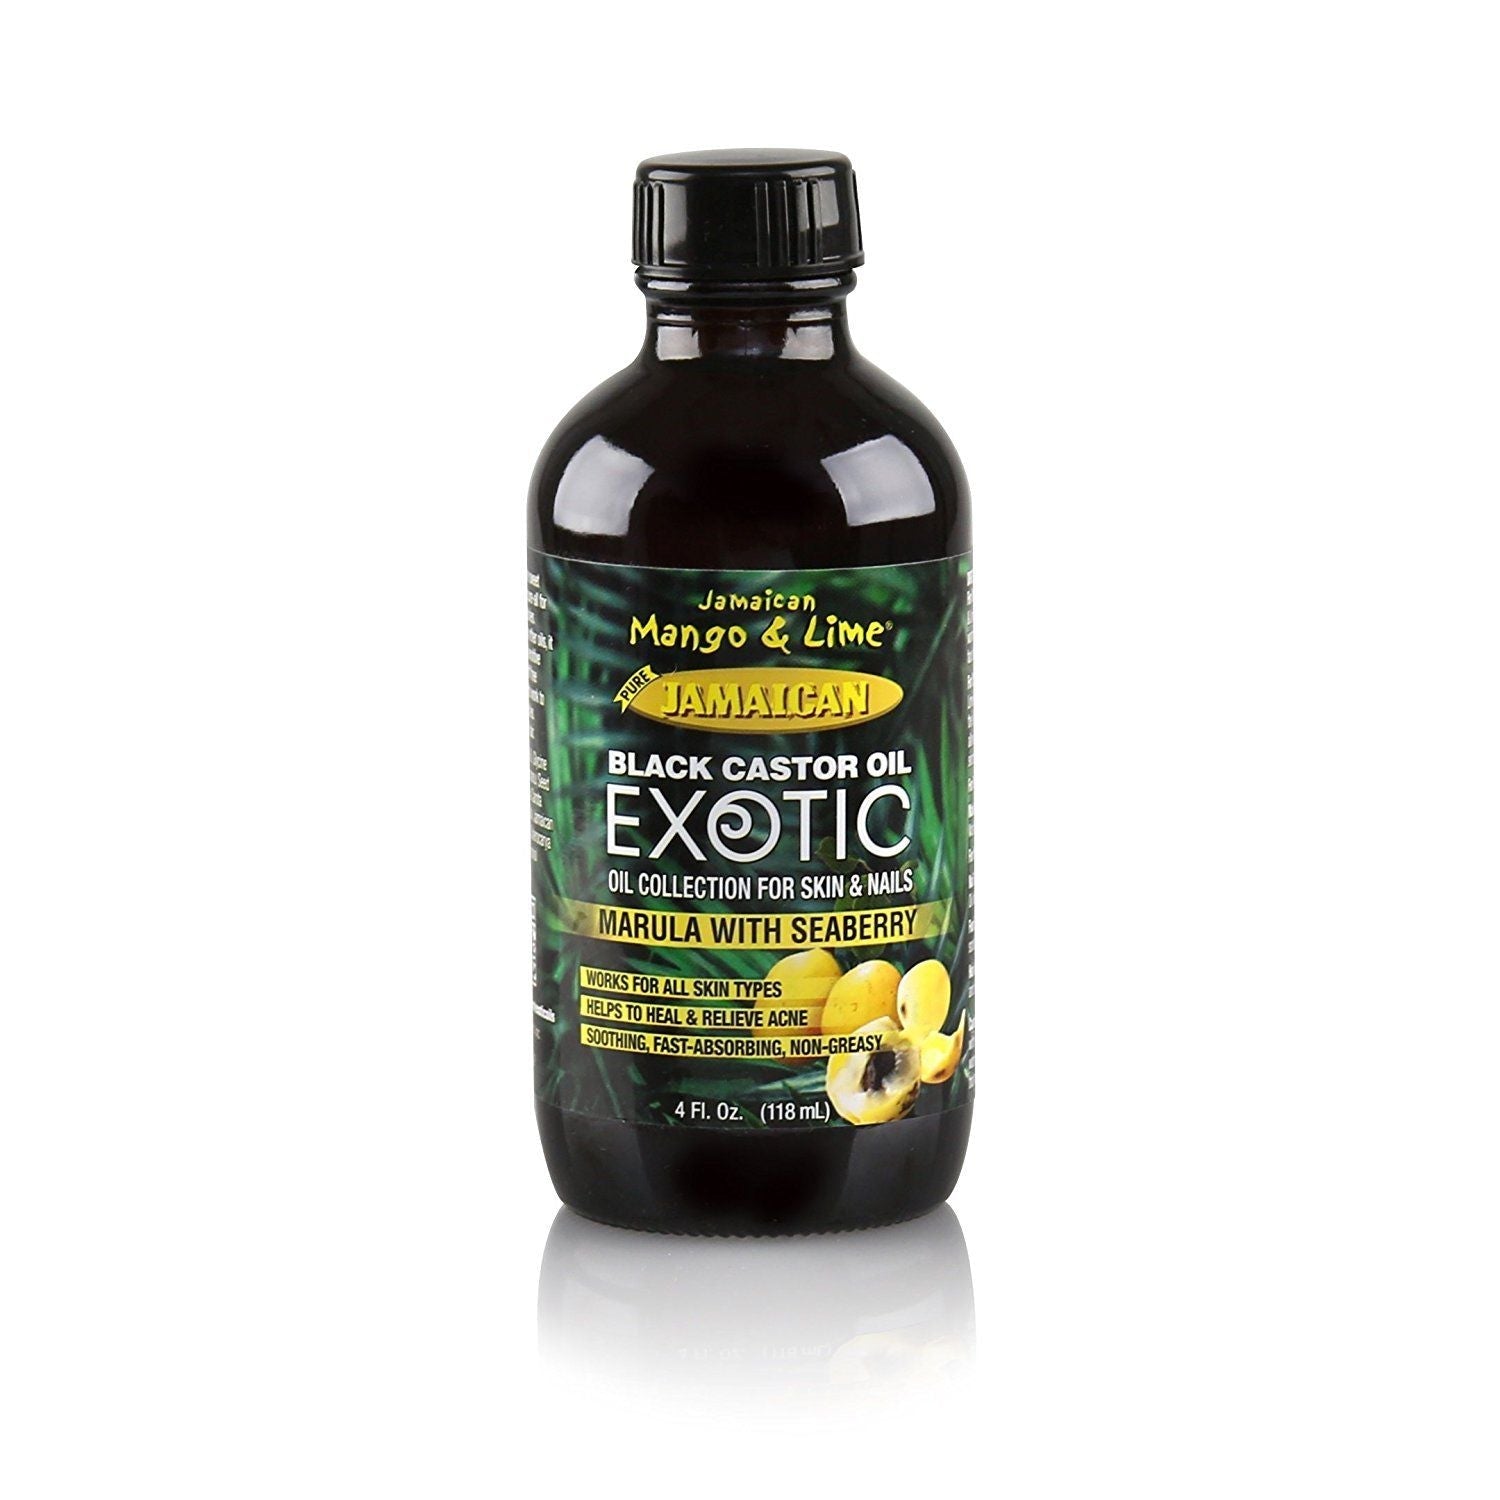 Jamaican Mango And Lime Black Castor Oil Exotic Oil Marula With Seaberry